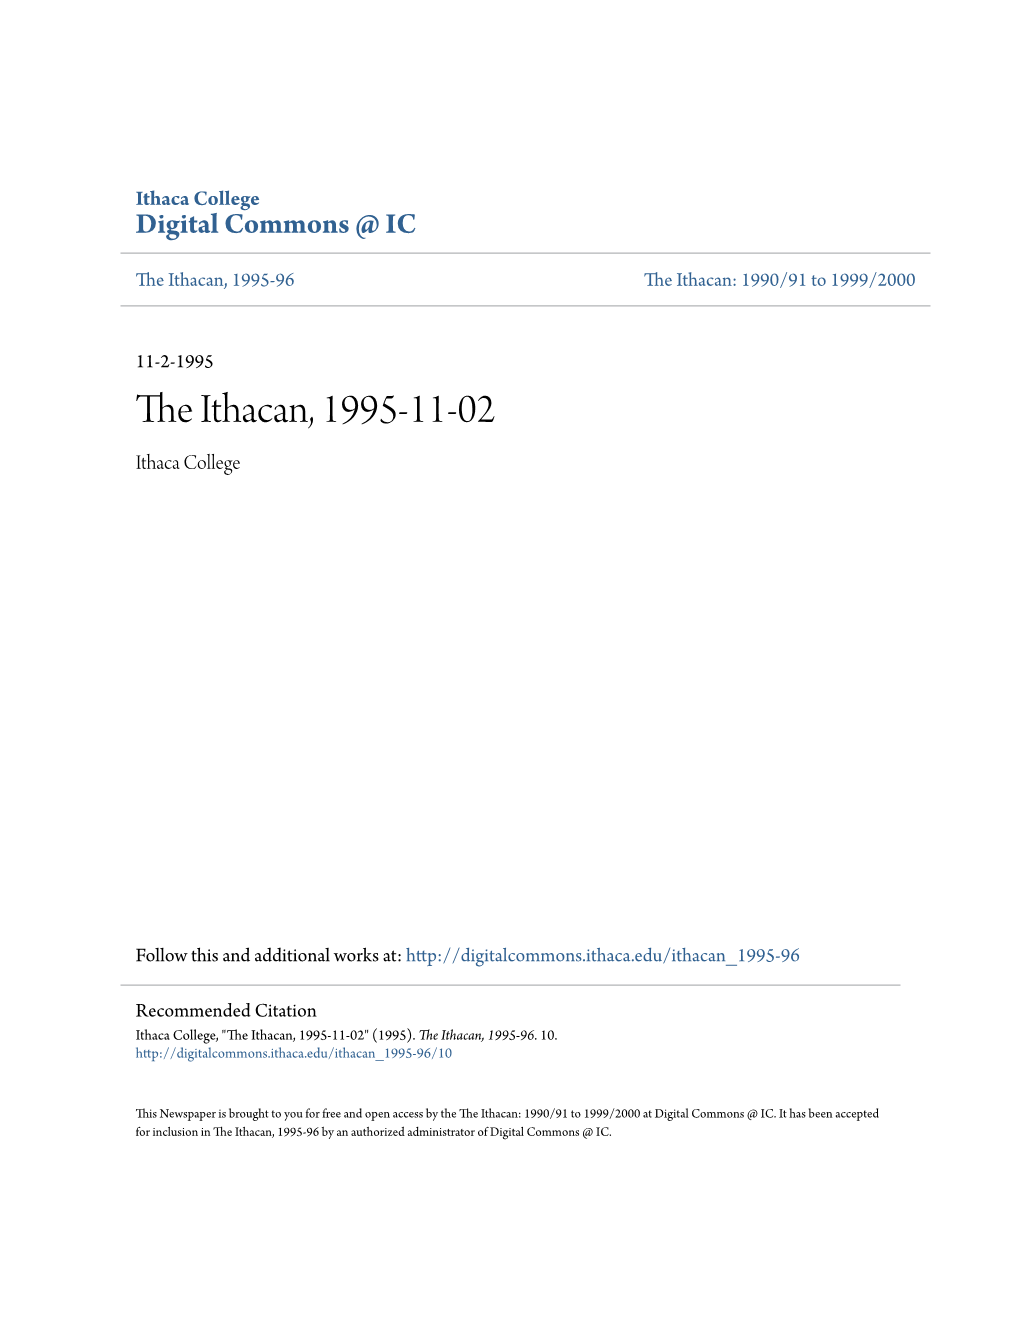 The Ithacan, 1995-11-02